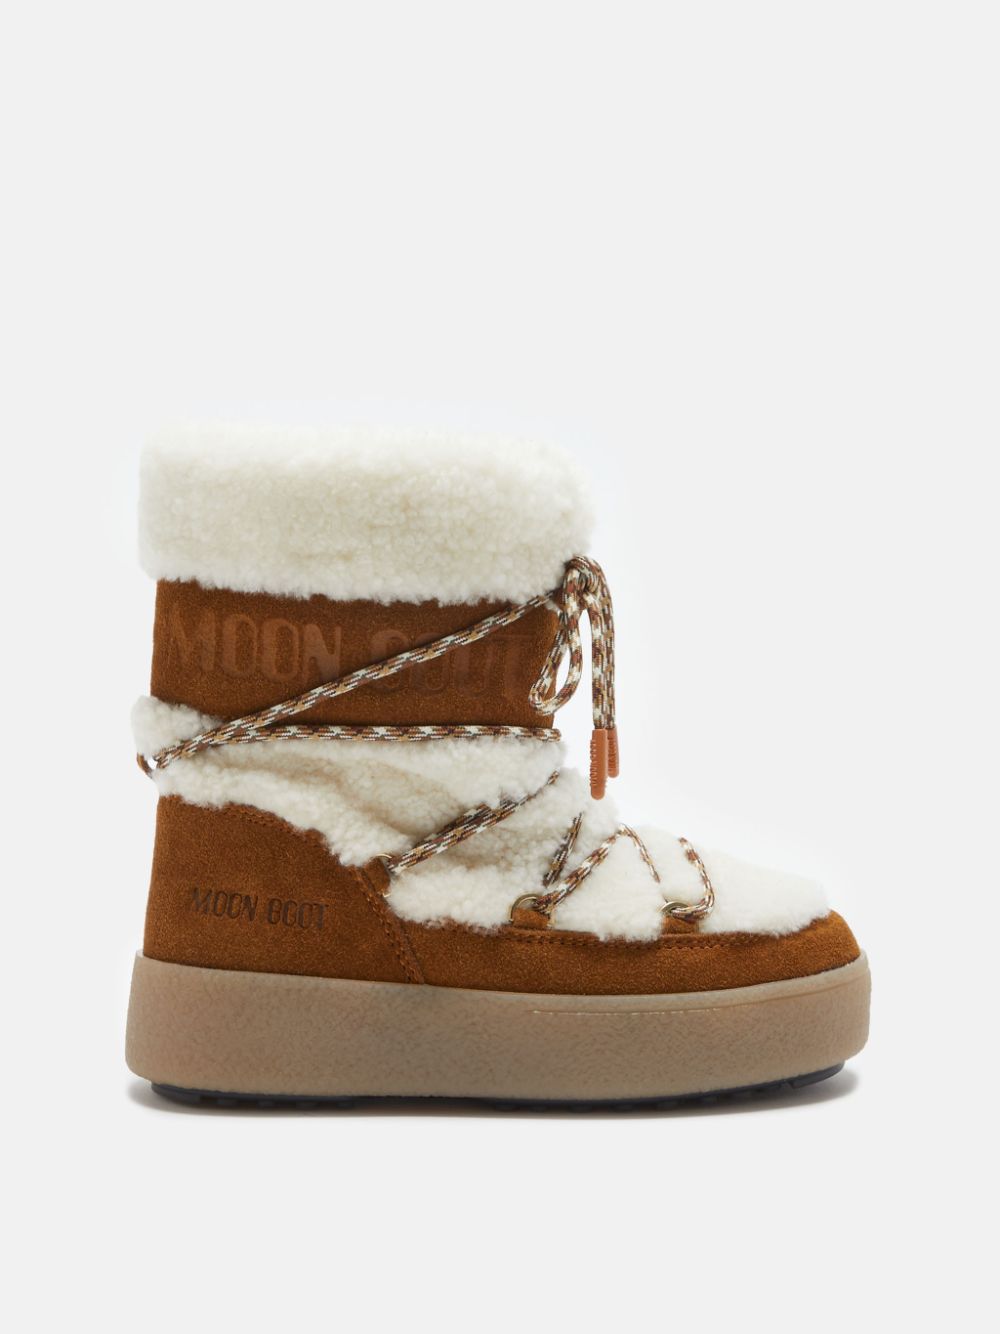 Mb Jtrack Shearling - Whisky/Off White